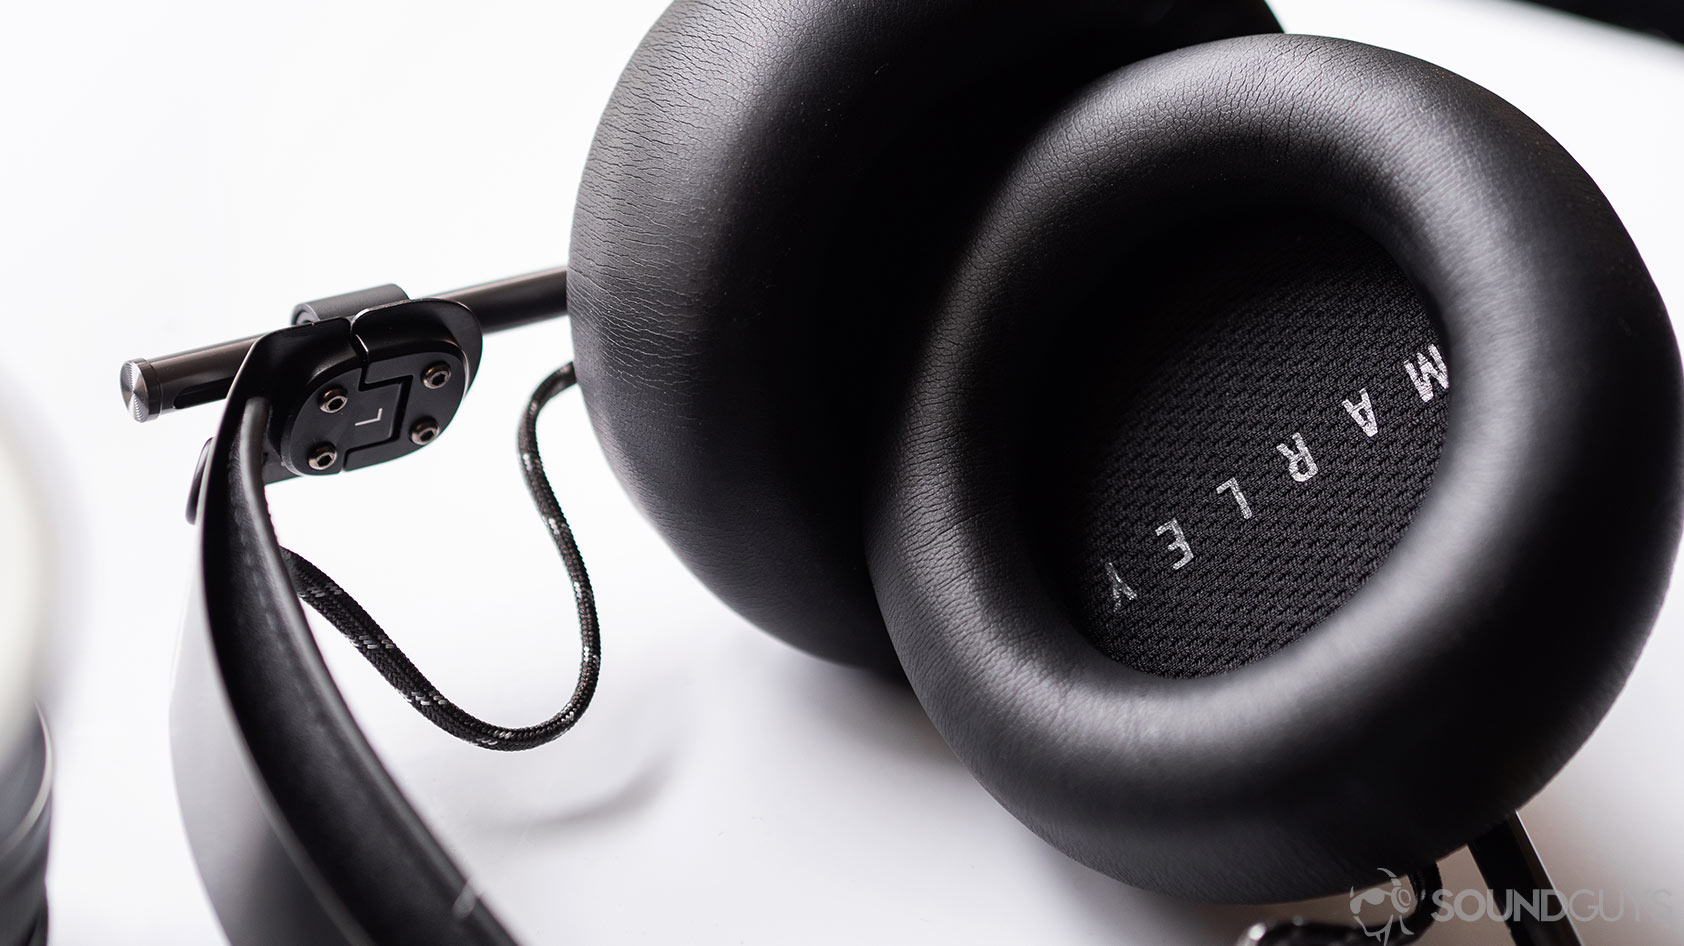 House of Marley Exodus: The inner ear cups are labeled &quot;Marley.&quot;